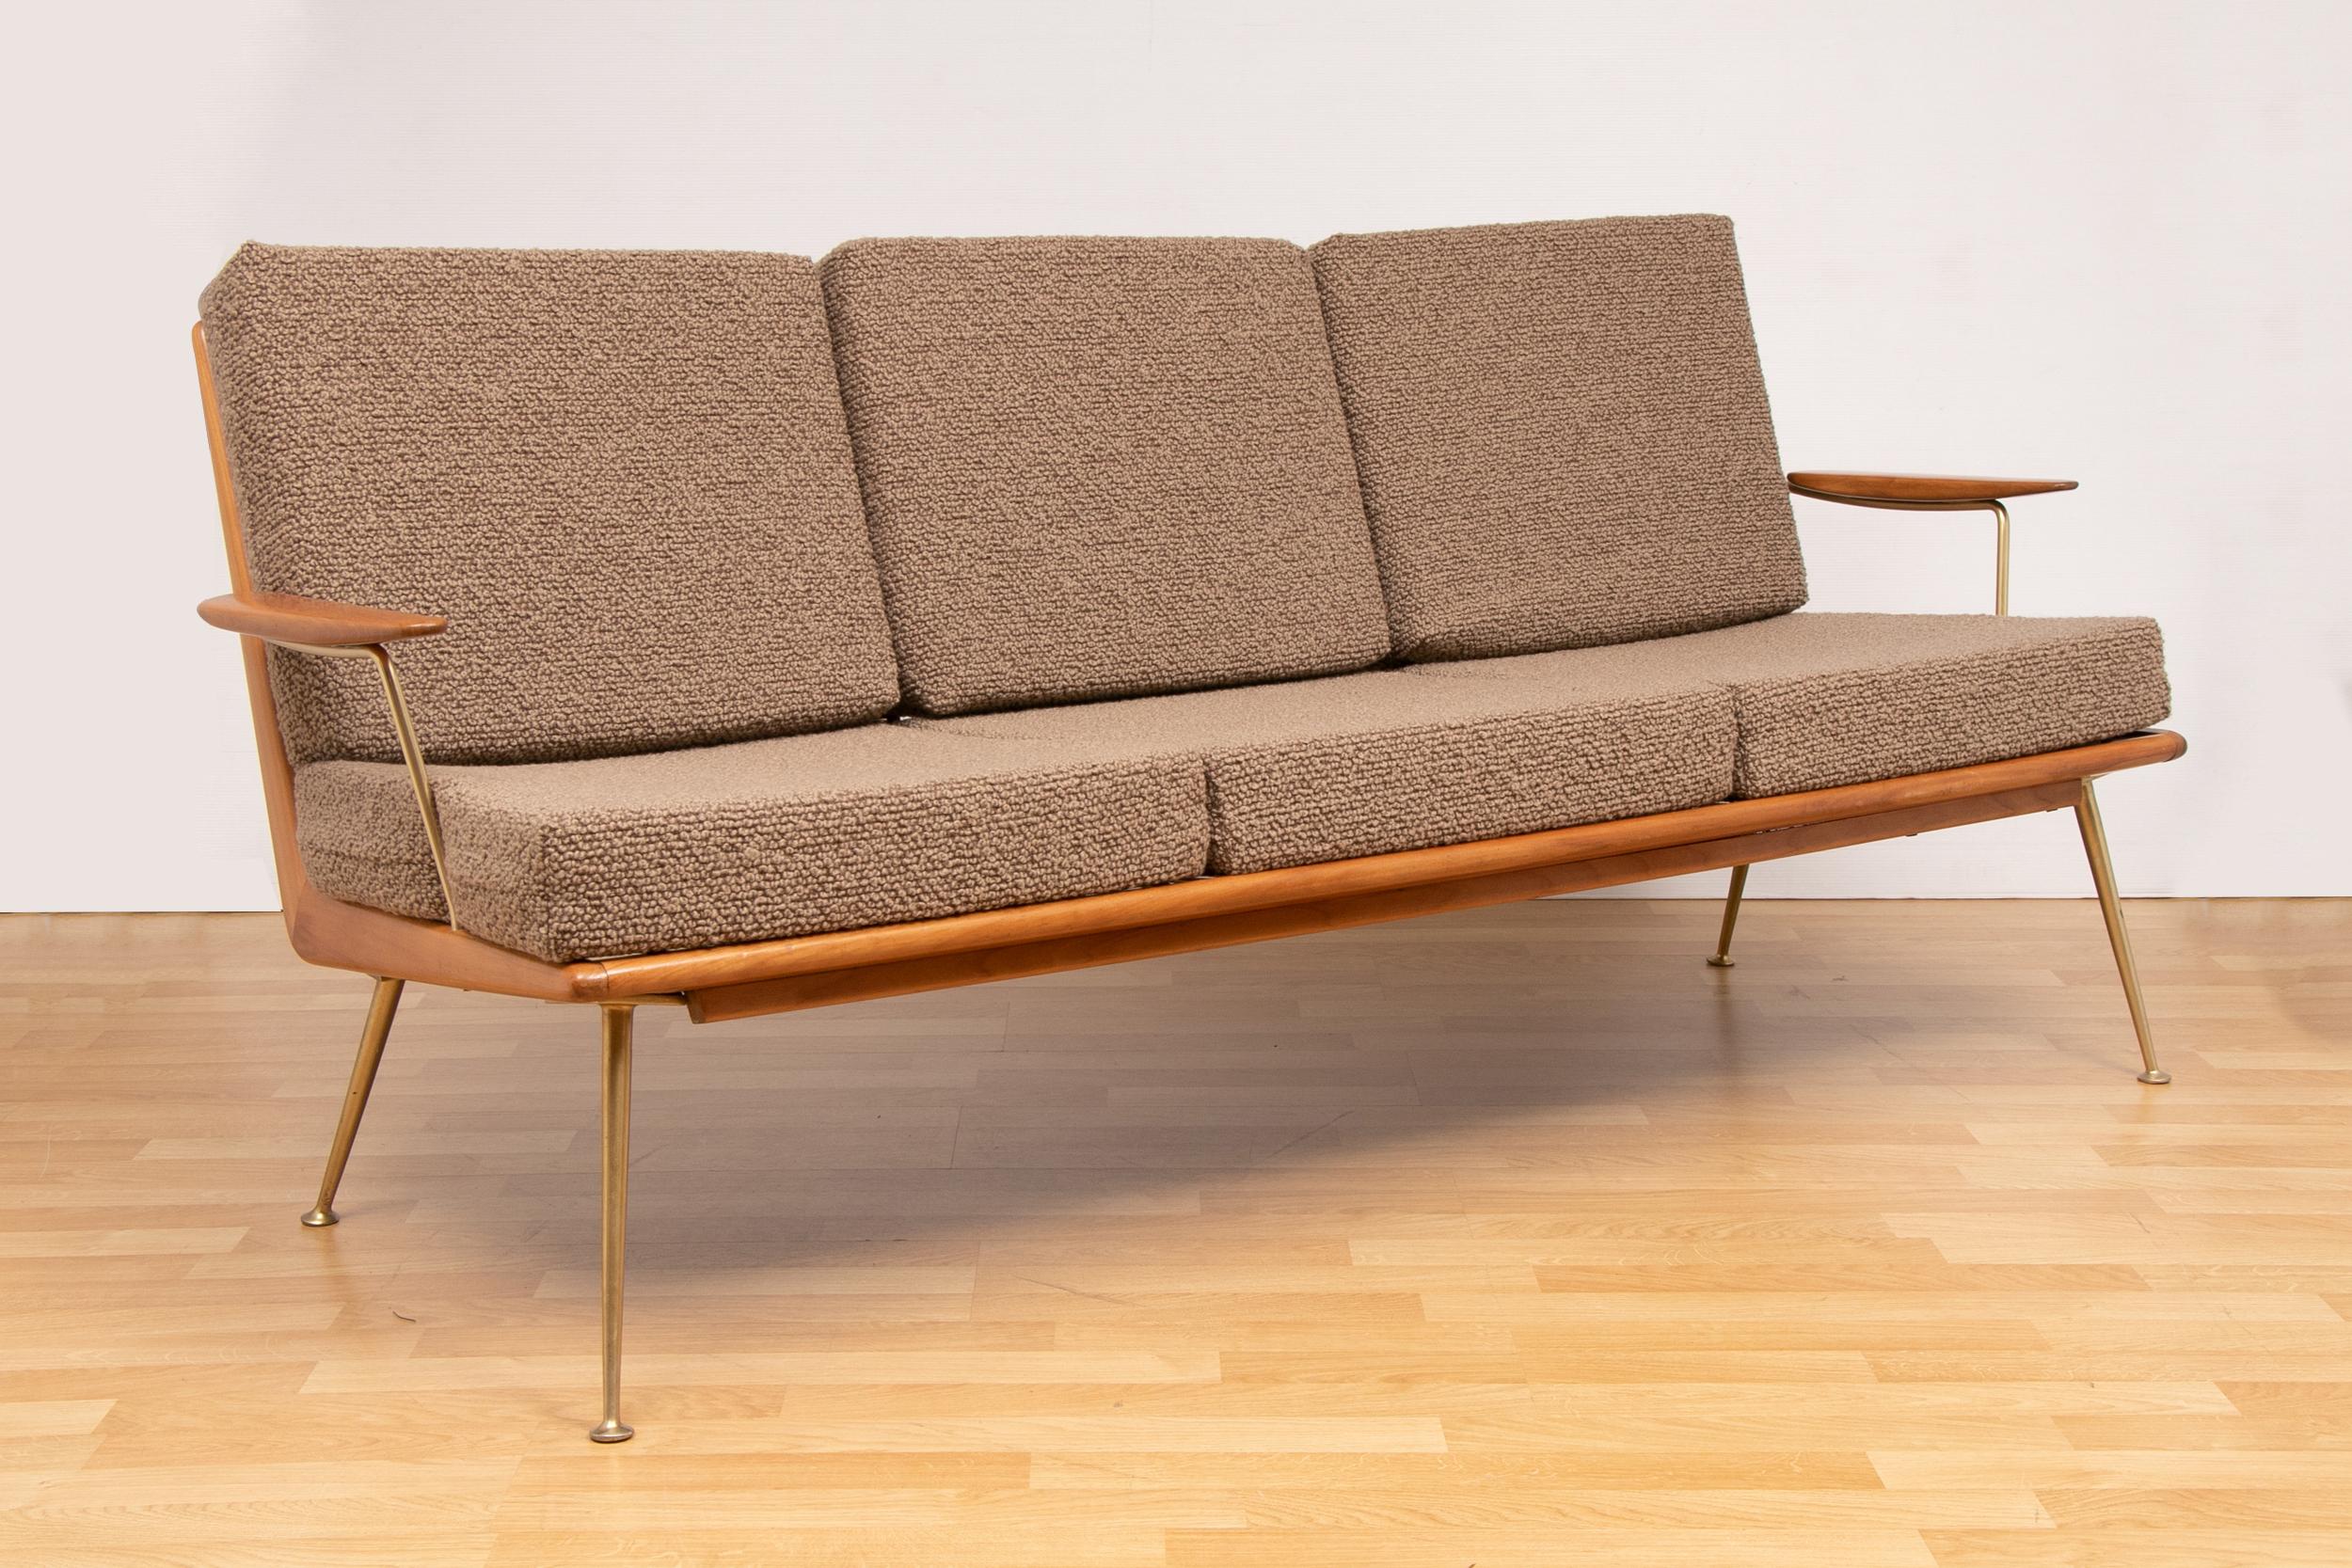 1950s Boomerang sofa and two easy chairs designed by Hans Mitzlaff and Eugen Schmidt. Manufactured by Soloform/Eugen Schmidt in Germany. Designed in 1953 with a solid cherry wood frame. Restored and reupholstered in Bute fabric. In very good vintage